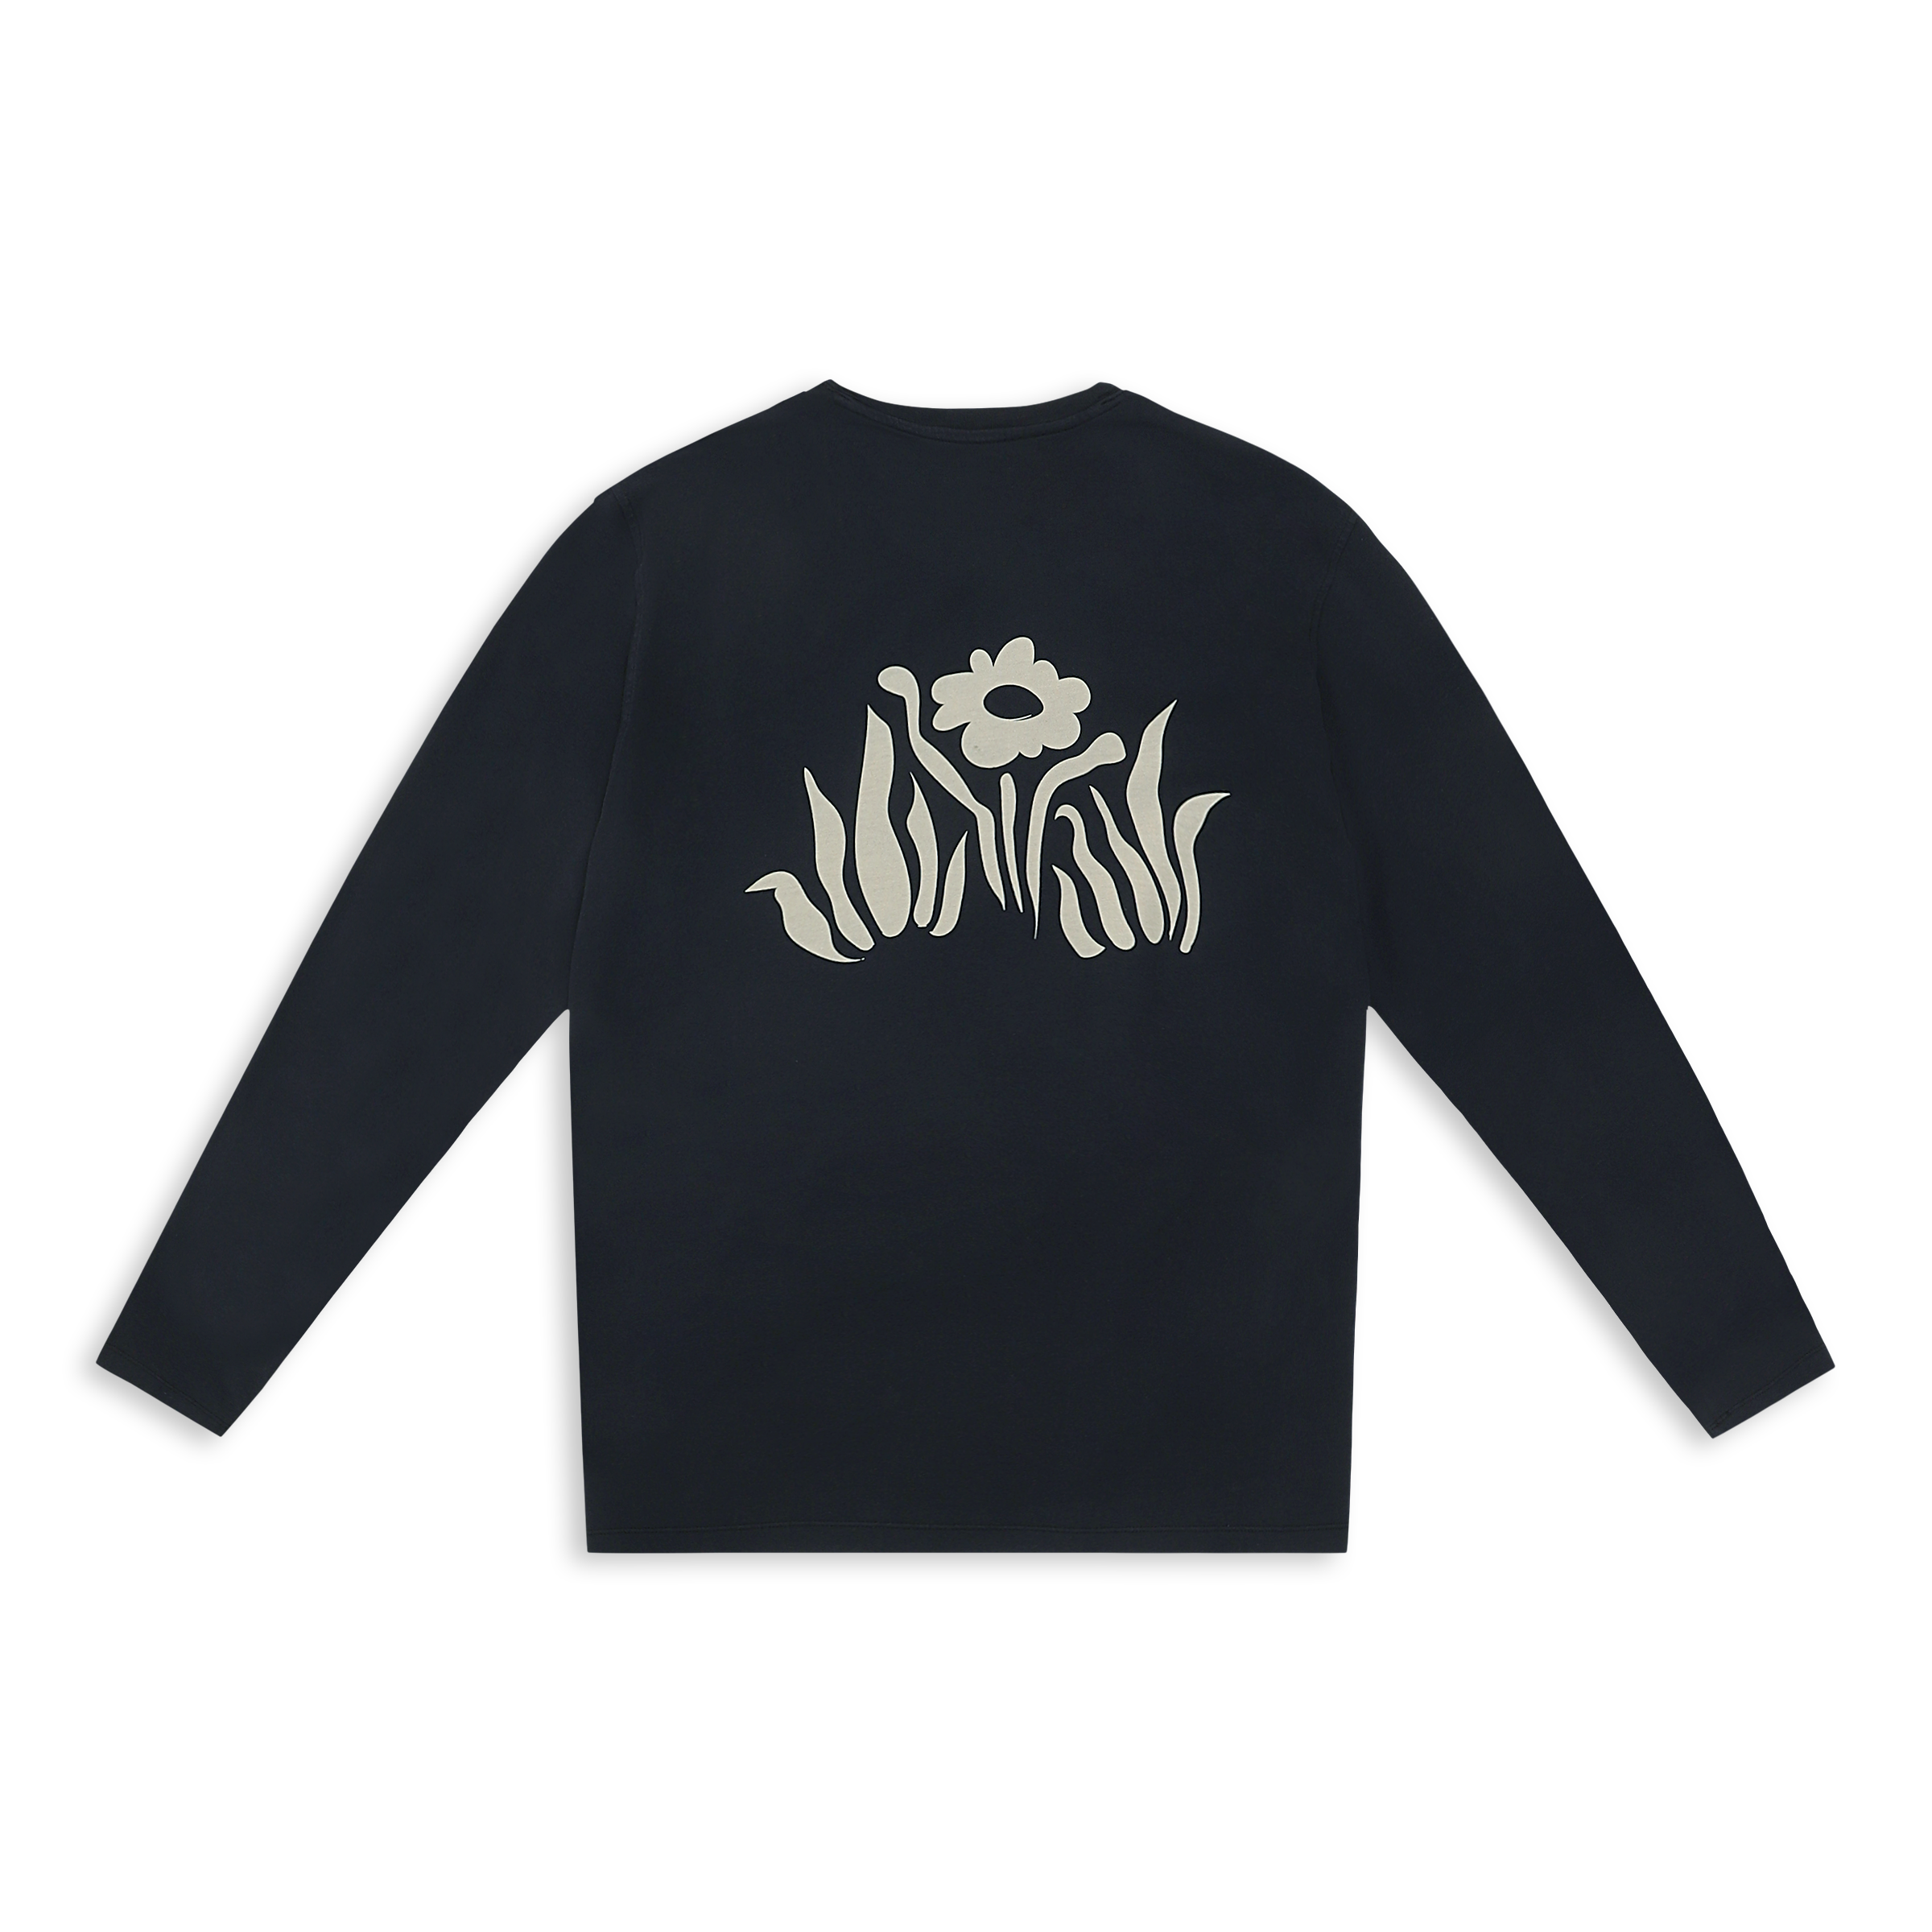 Natural Dye Graphic Long Sleeve - Explore & Discover